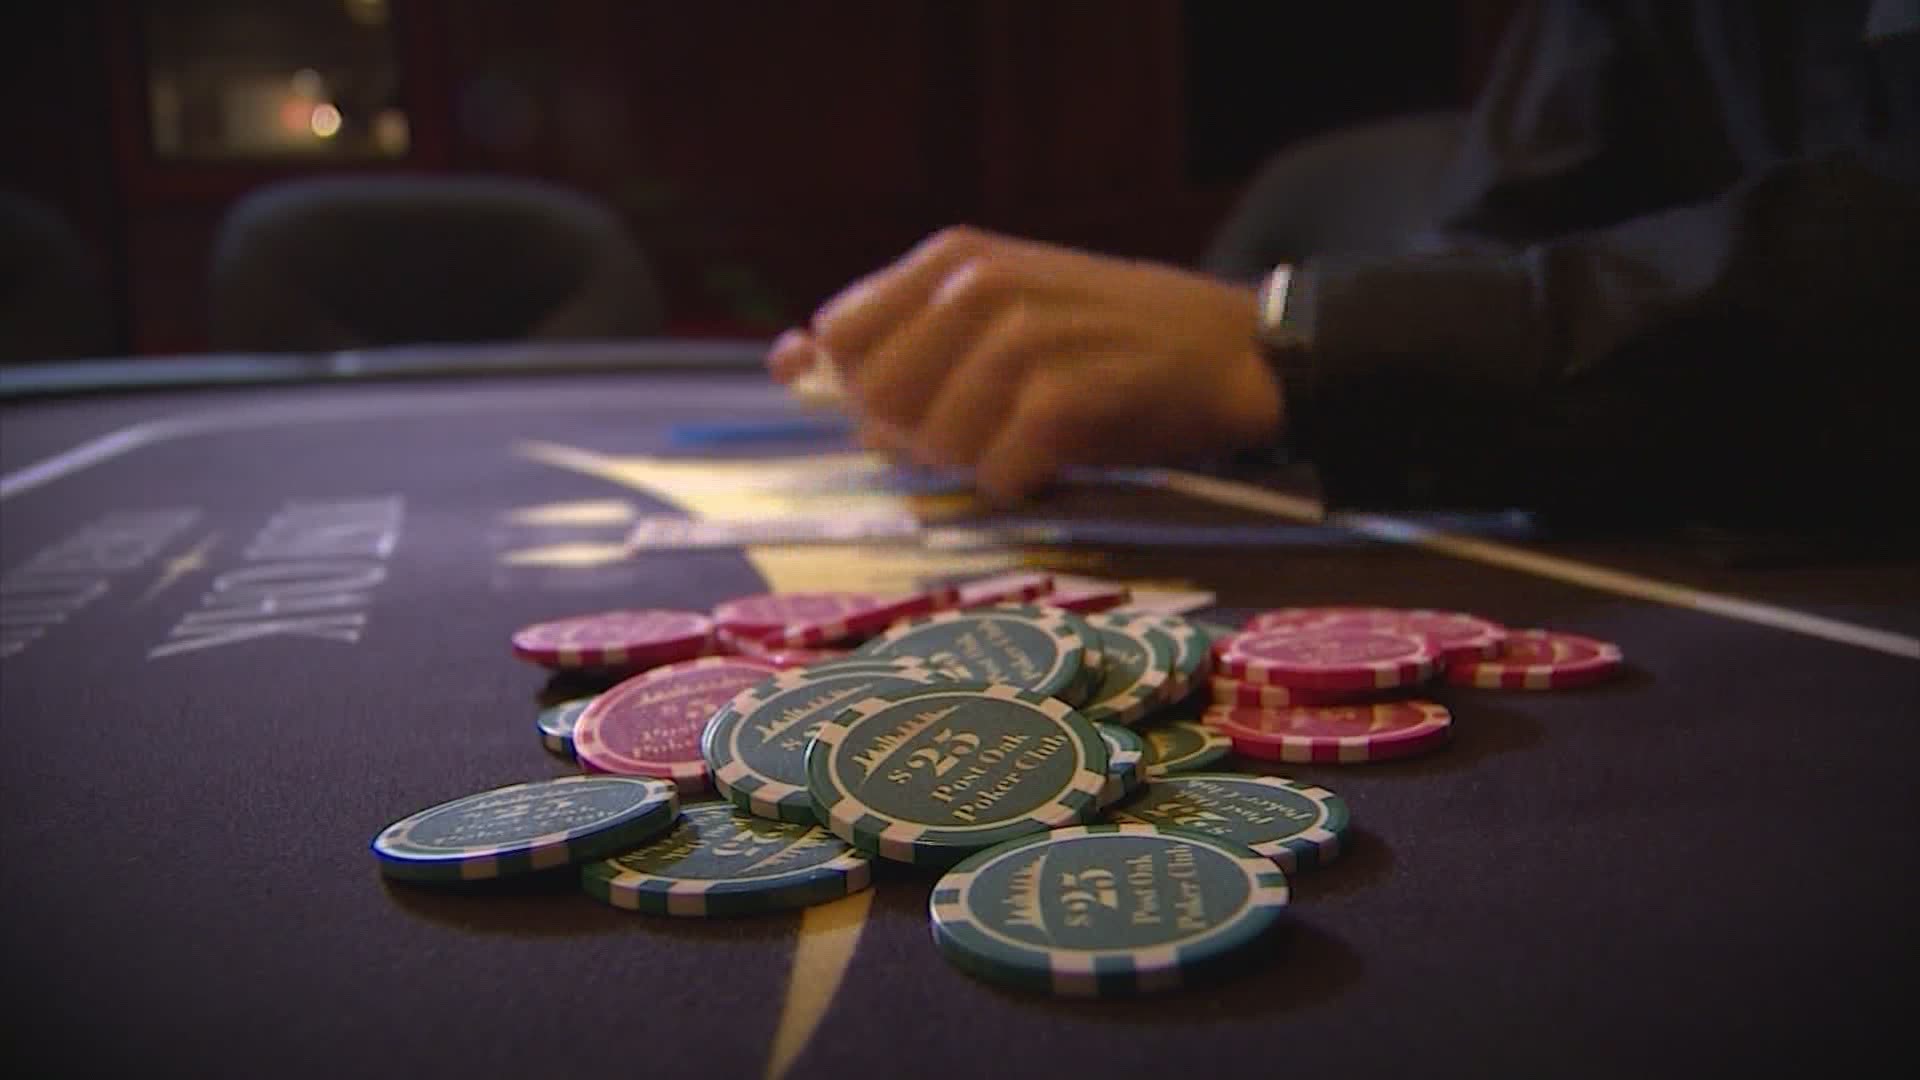 A casino coming to Texas? A Las Vegas resort is bettting on Texas lawmakers to expand state gambling laws.